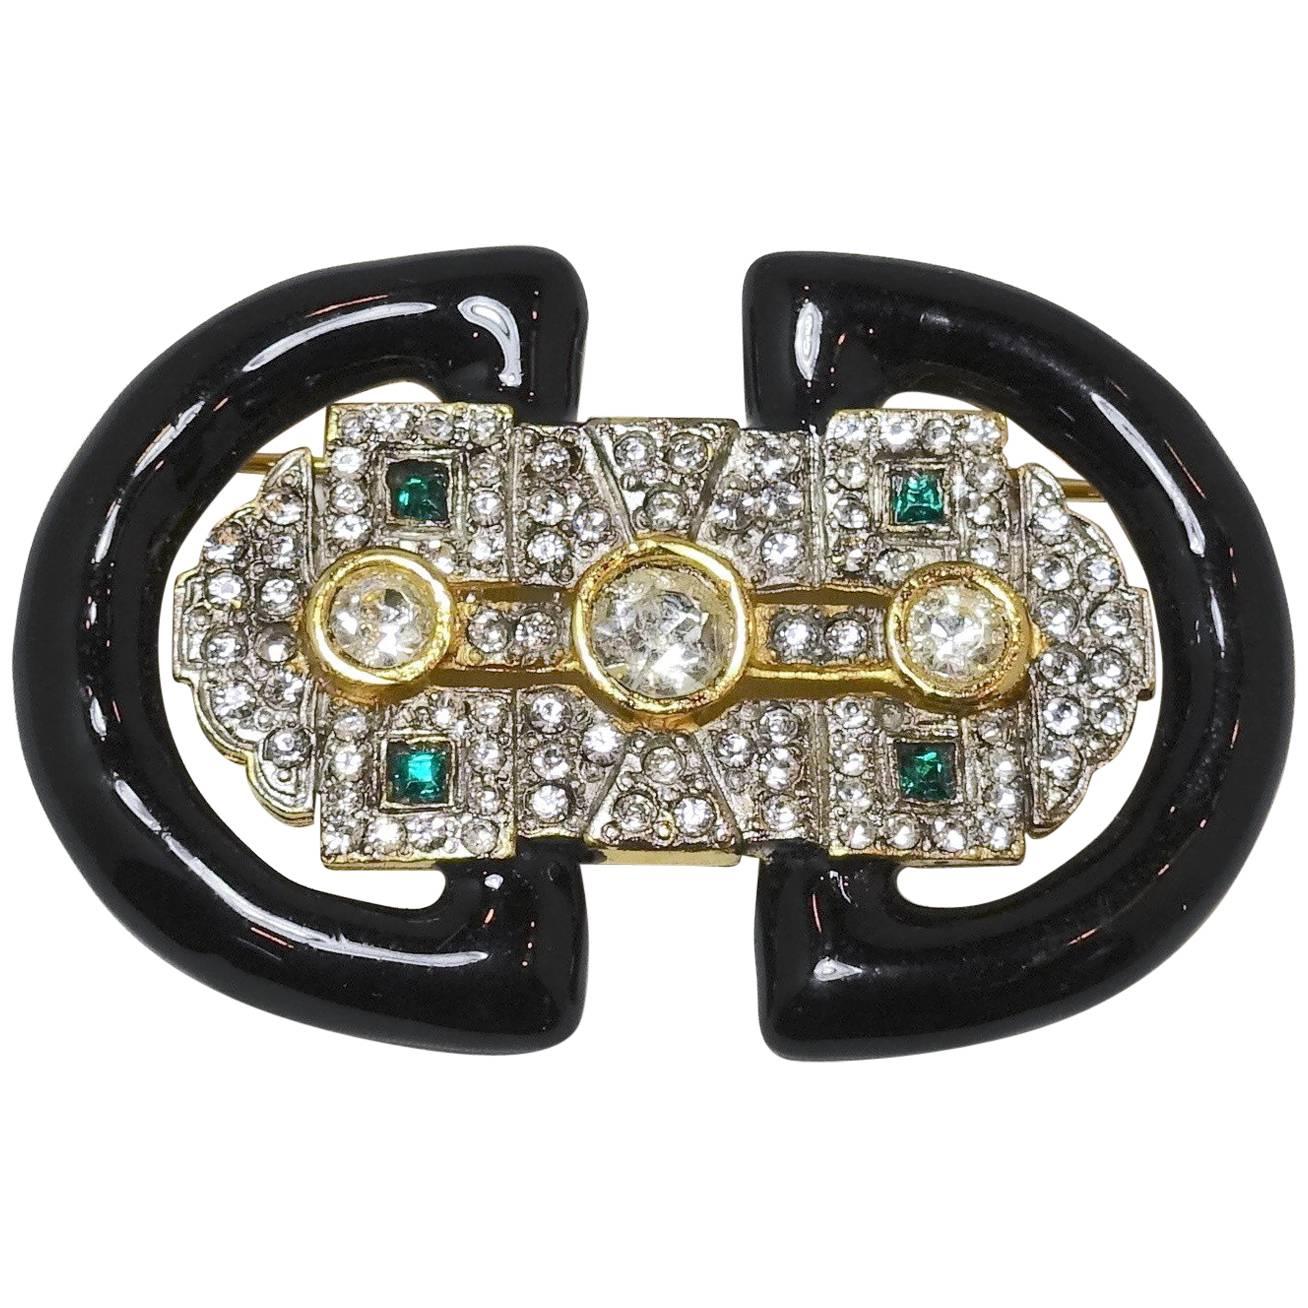 Deco Style Black Enamel With Green & White Crystals Brooch